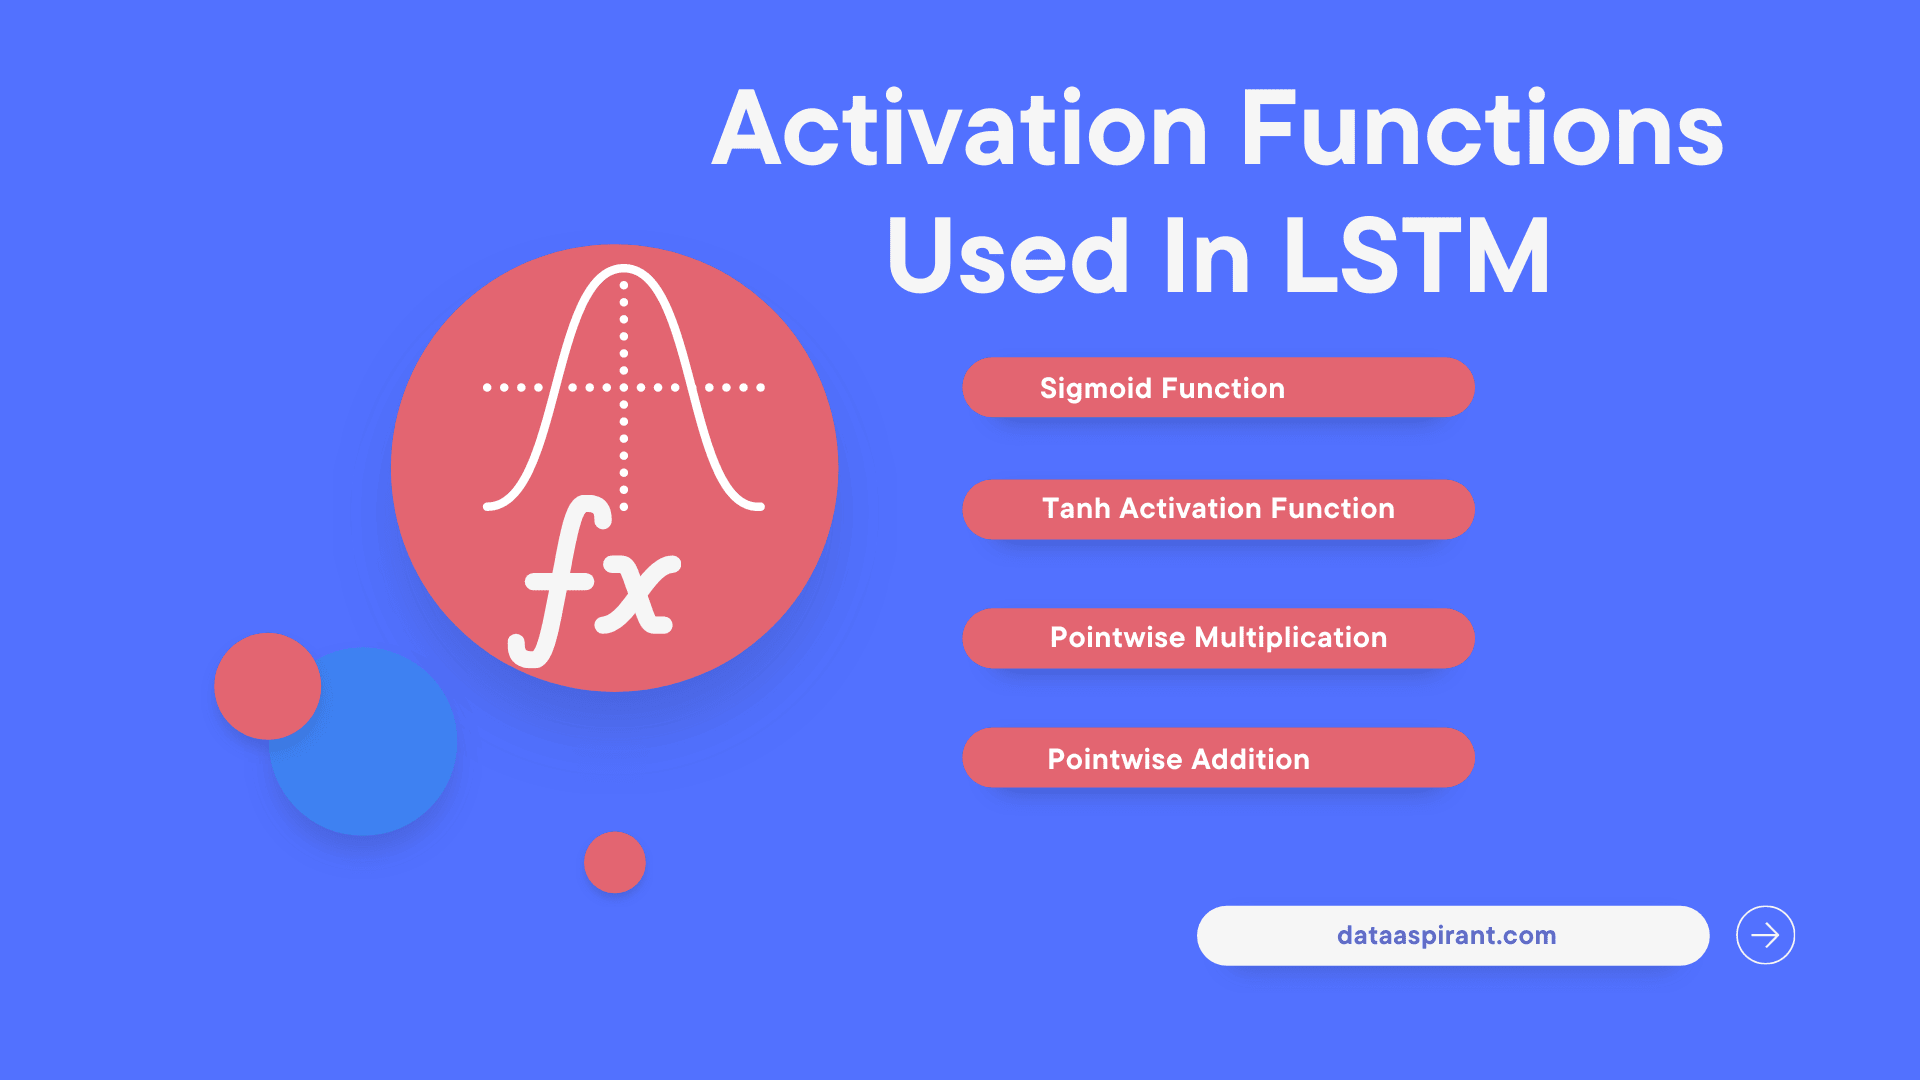 Activation Functions Used In LSTM